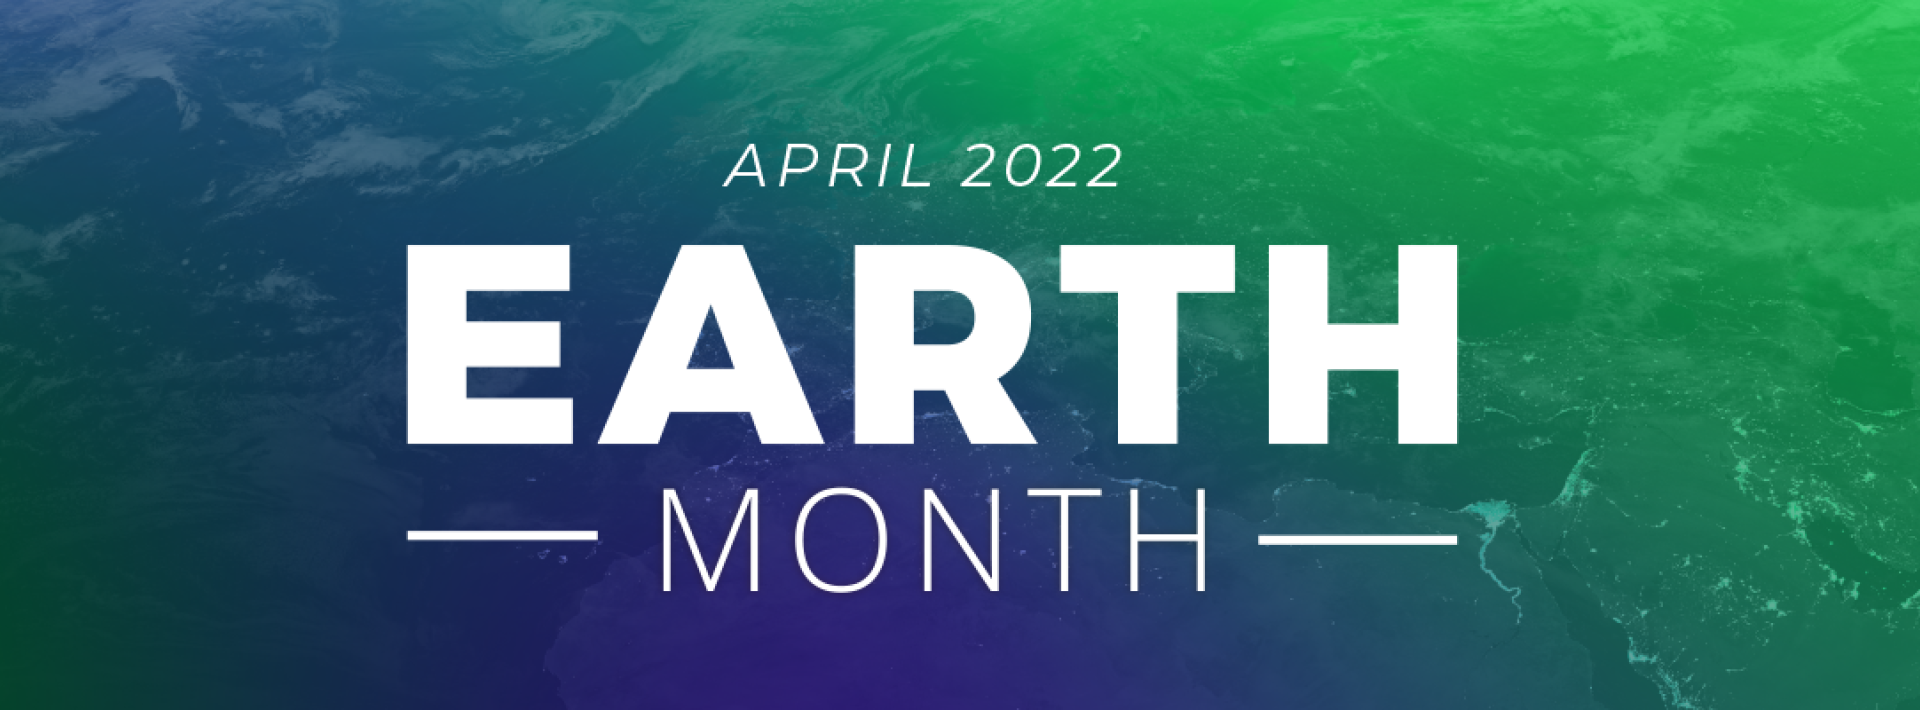 earth month banner